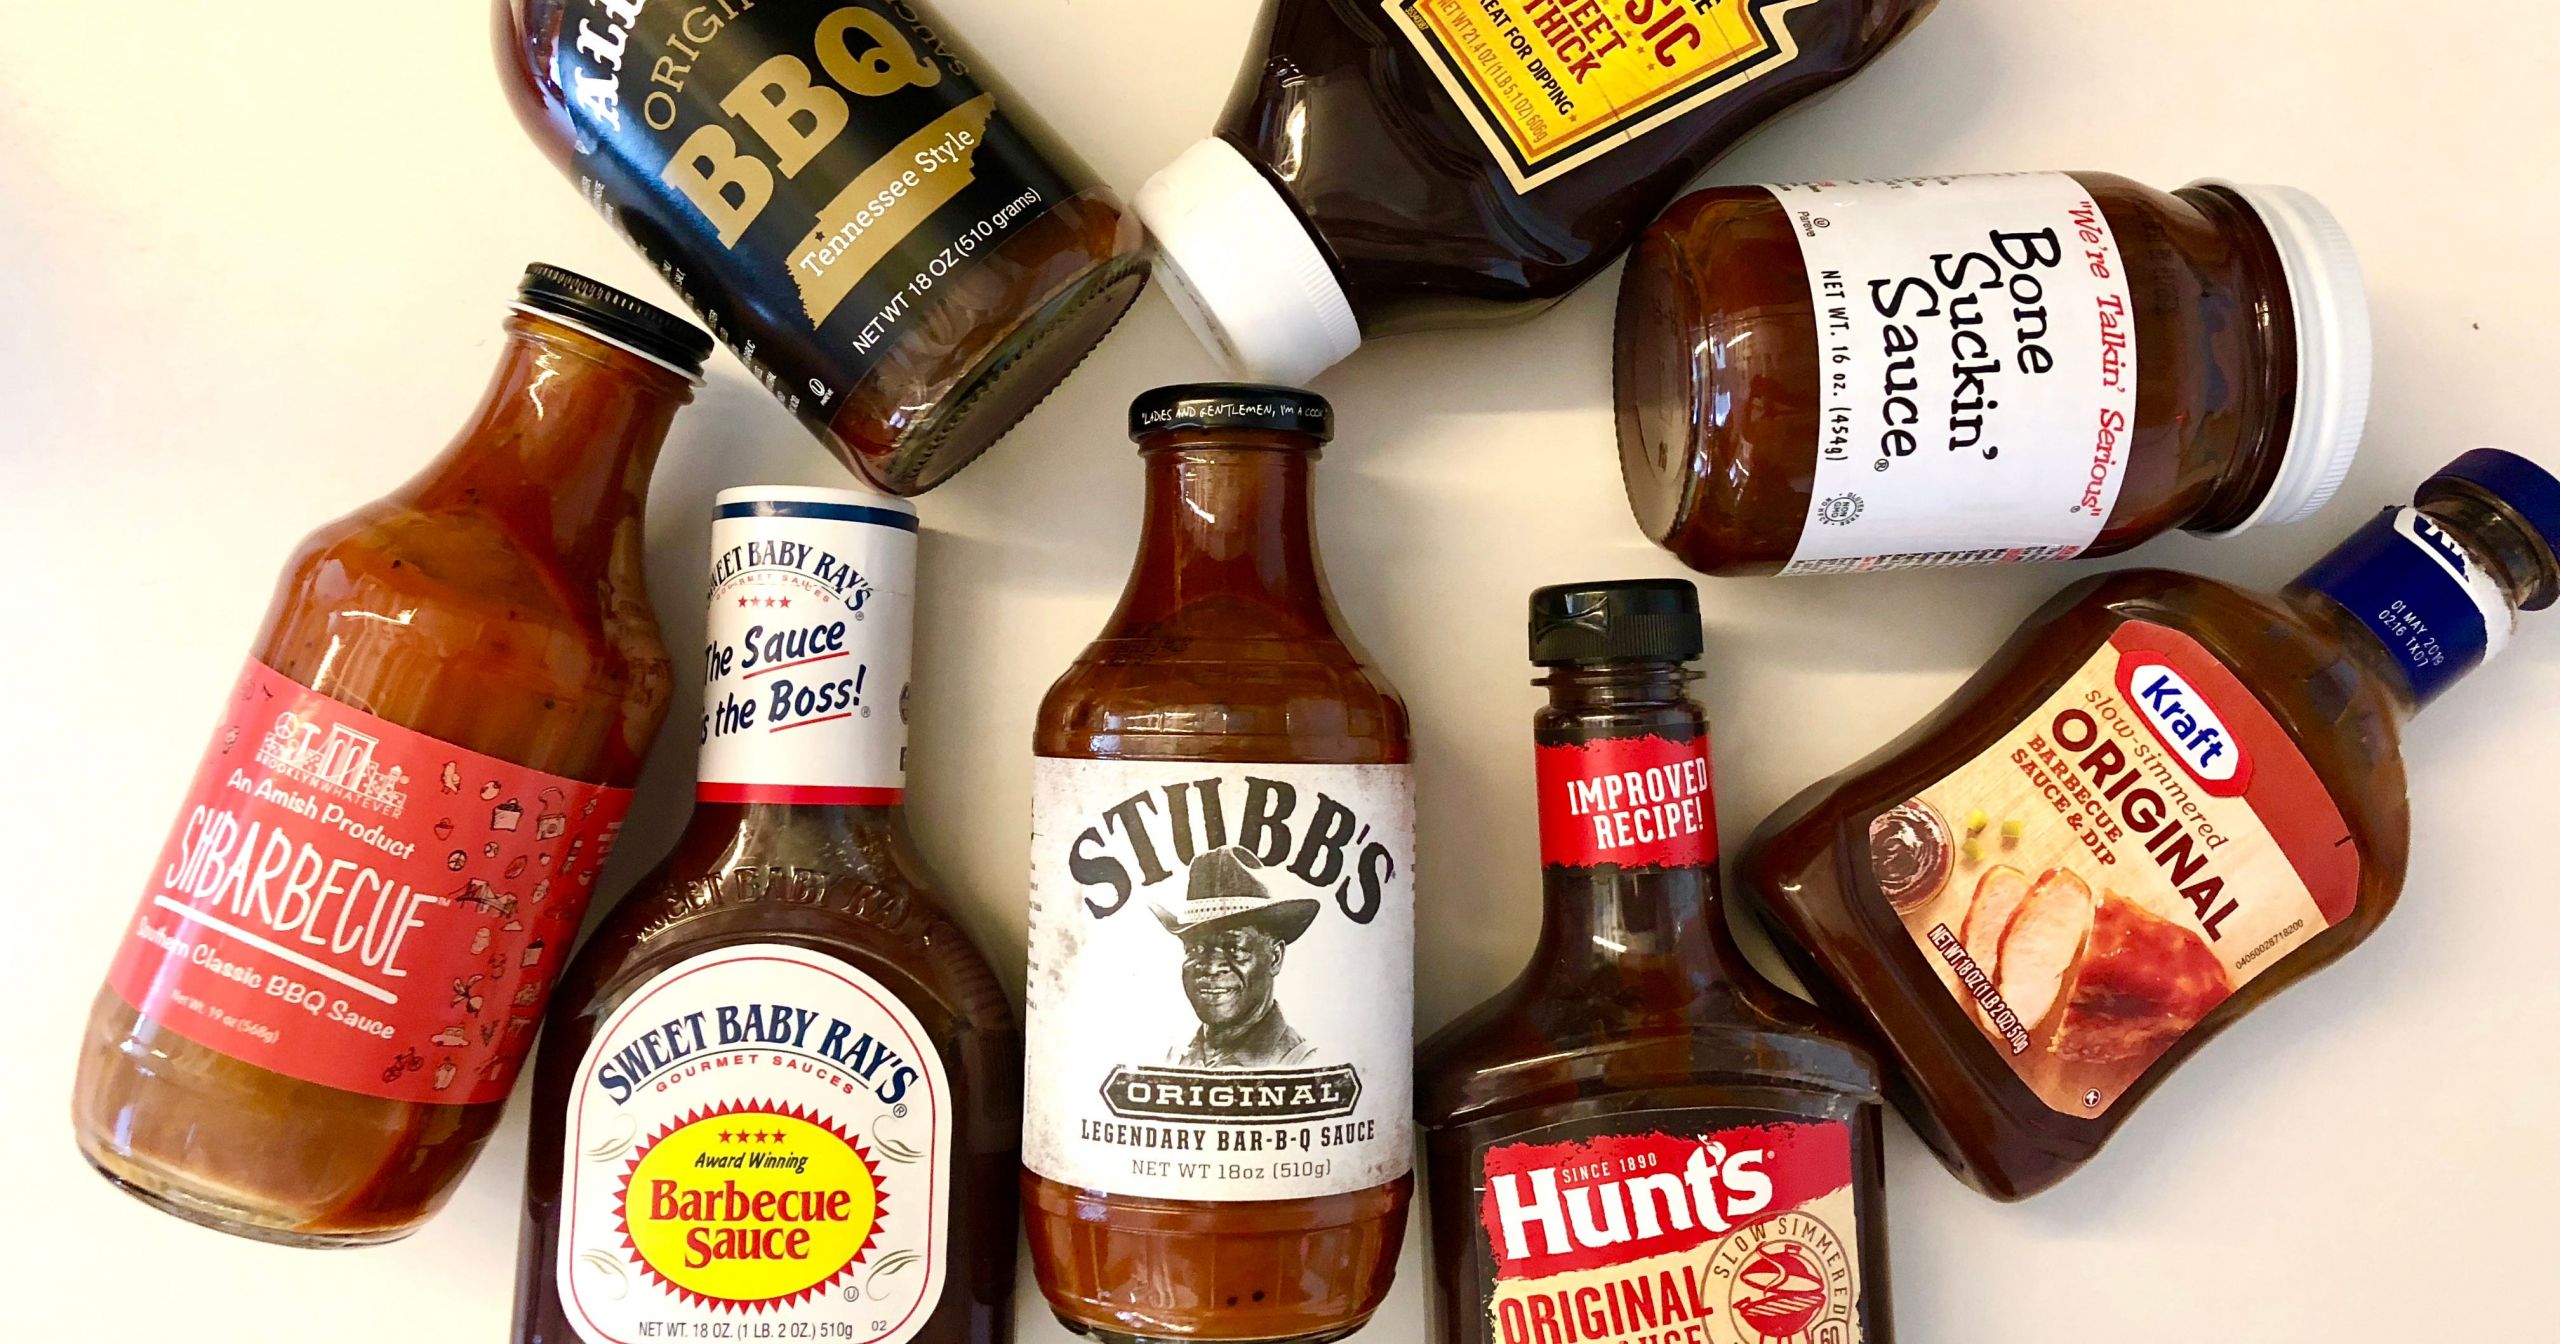 Best Store Bbq Sauce
 Best Store Bought BBQ Sauce Bottles For Memorial Day